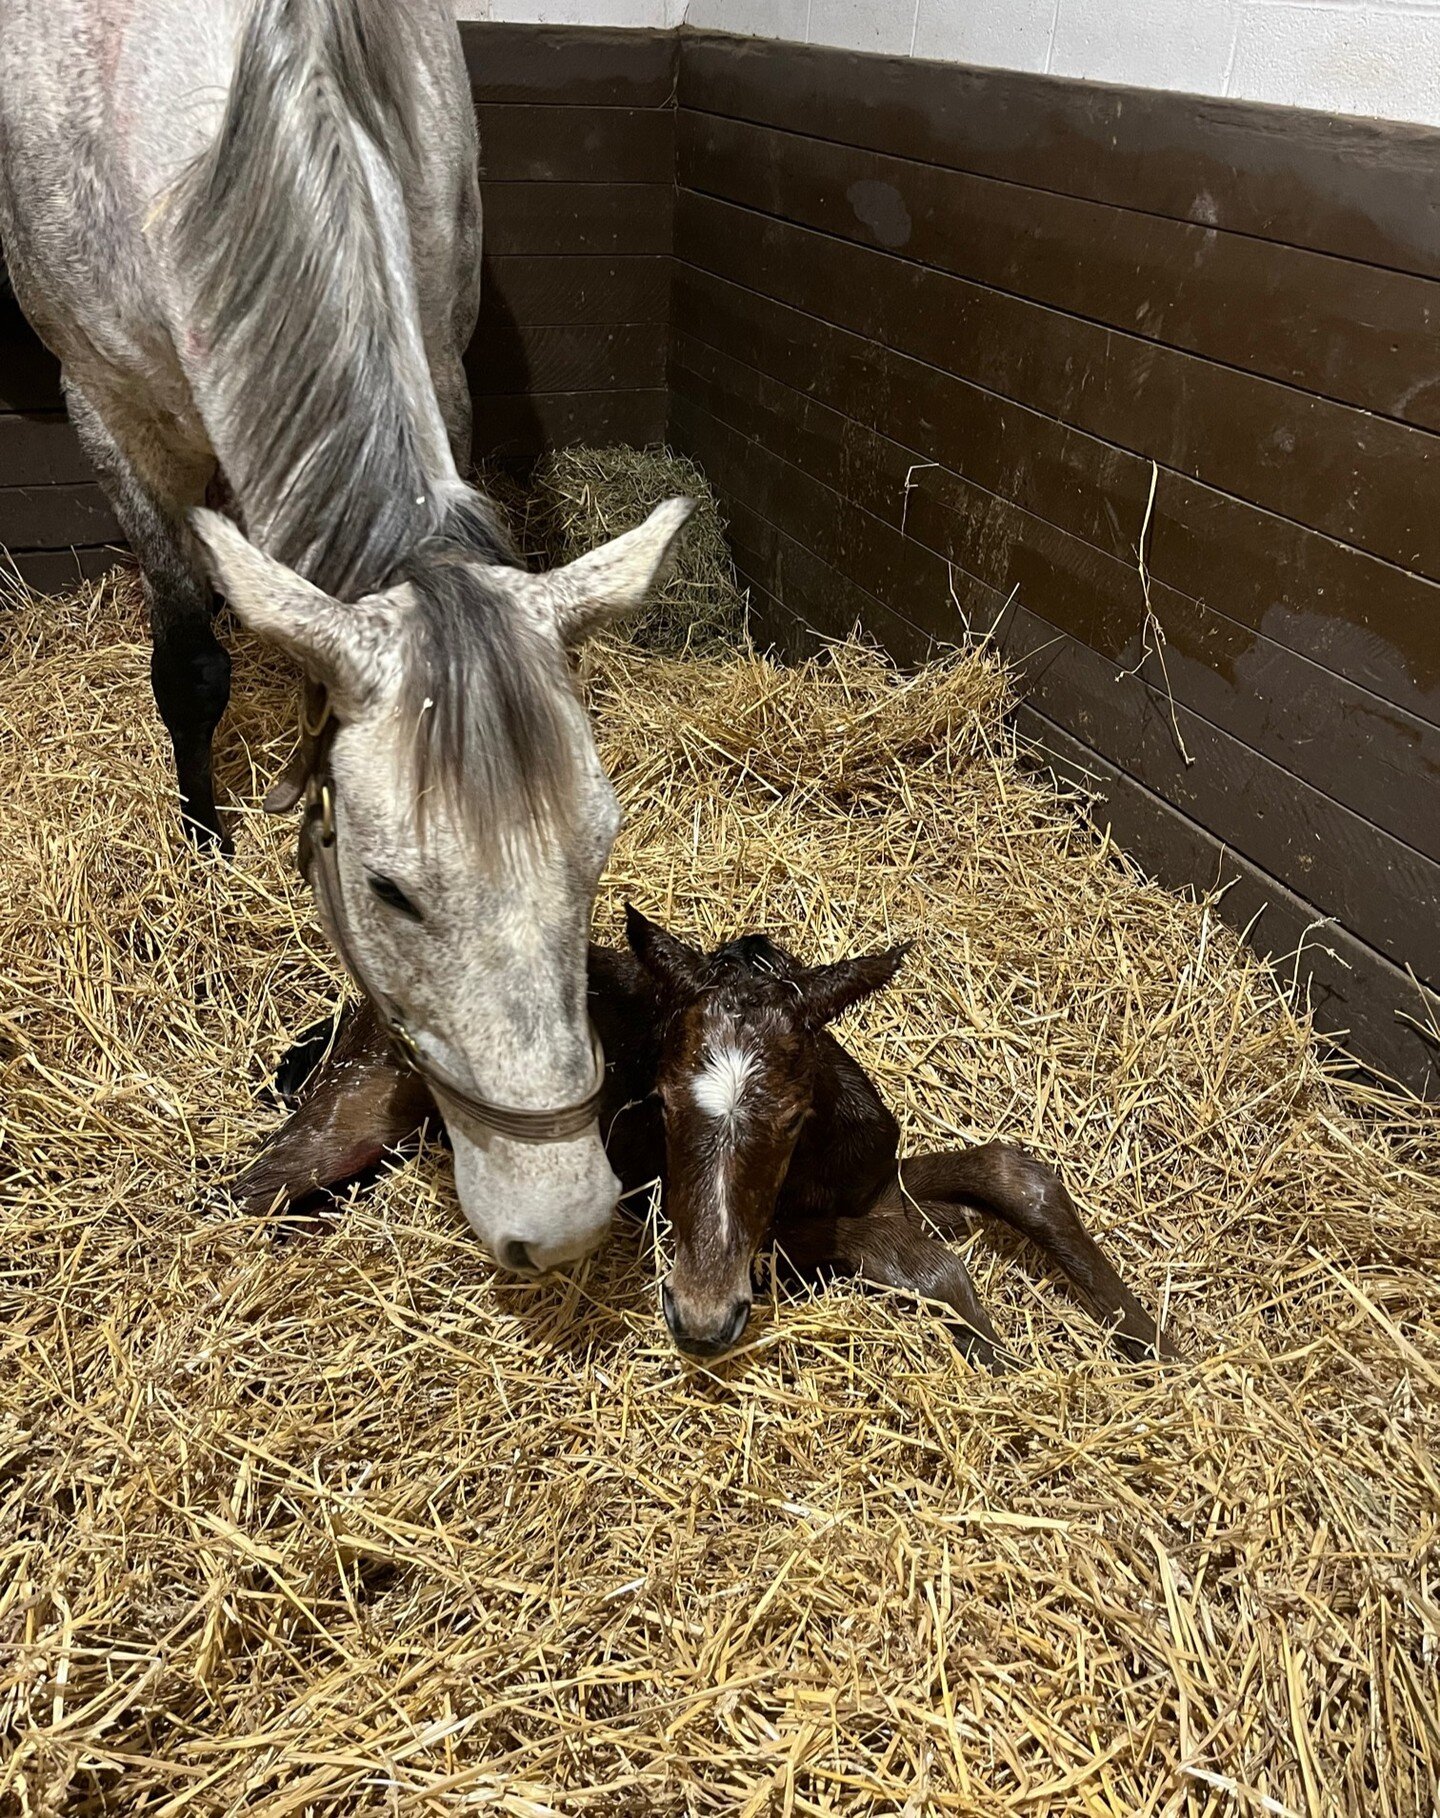 3rd foal of the season!! Born very early this morning, a very good looking colt by By My Standards!!

By My Standards/Somewhere 24' Colt
Born 1/20/24